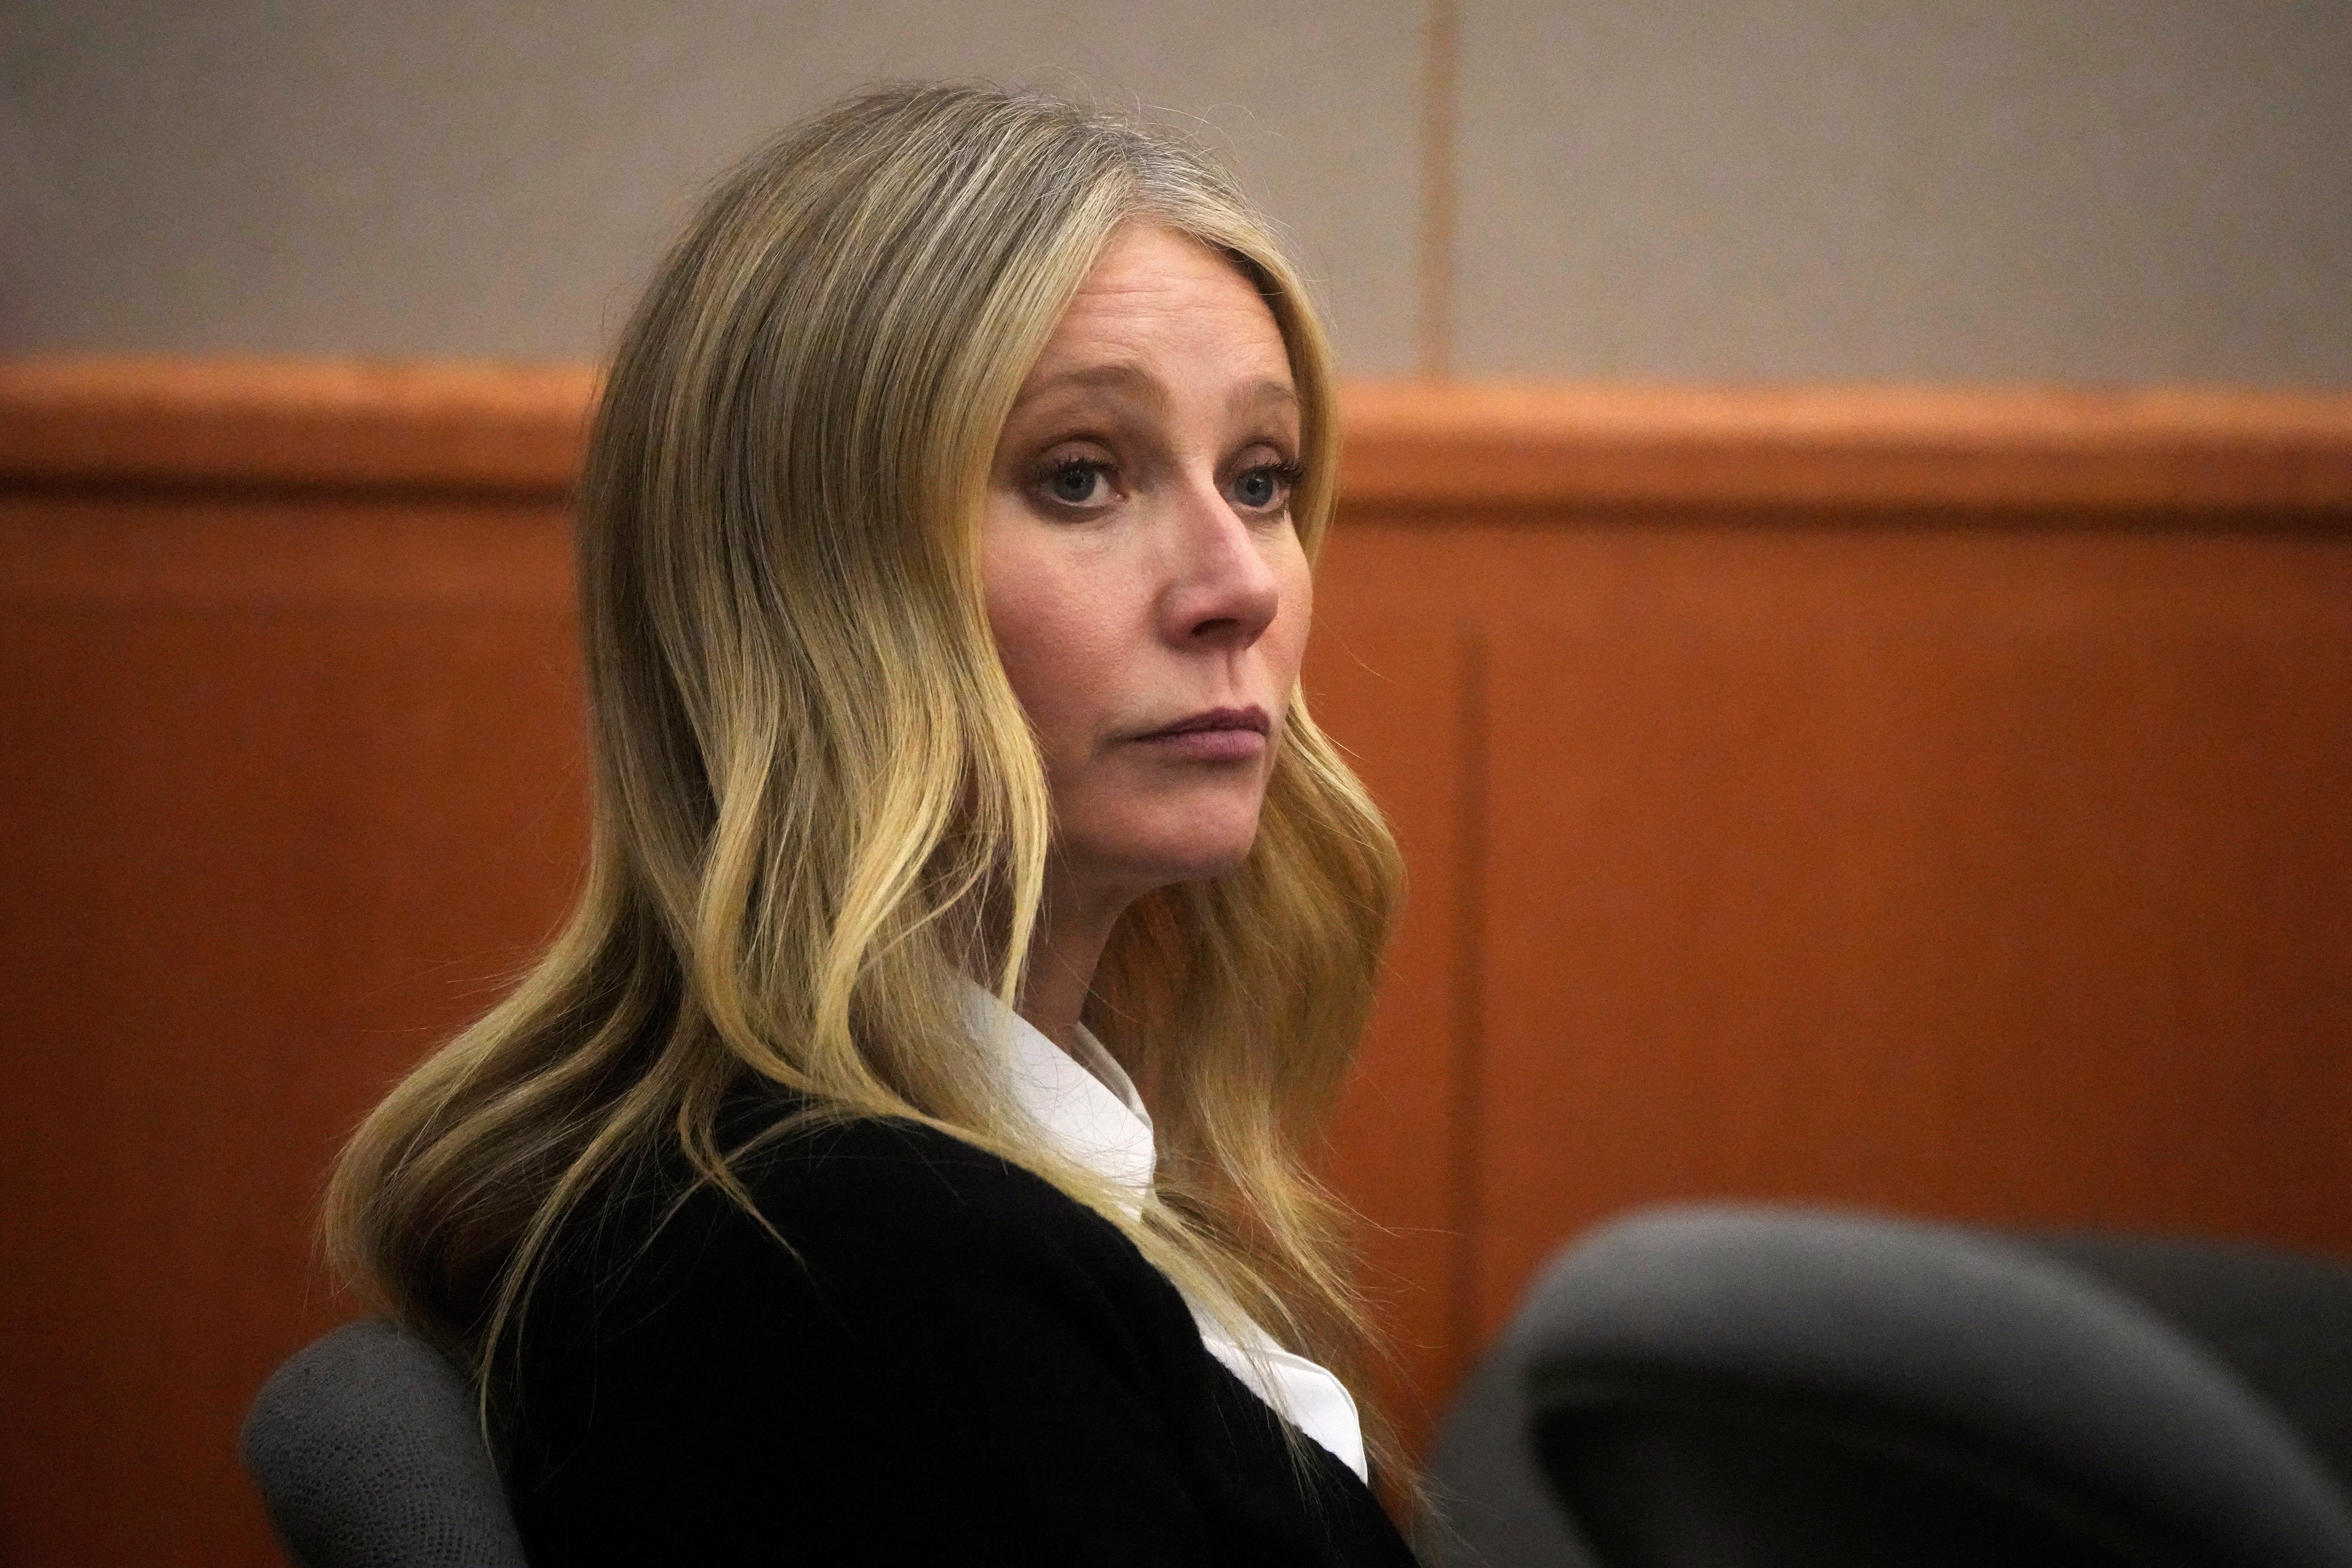 Gwyneth Paltrow sits in court during an objection by her attorney at her trial, Monday, March 27, 2023, in Park City, Utah, U.S.,. Paltrow is accused in a lawsuit of crashing into a skier during a 2016 family ski vacation, leaving him with brain damage and four broken ribs. Rick Bowmer/Pool via REUTERS